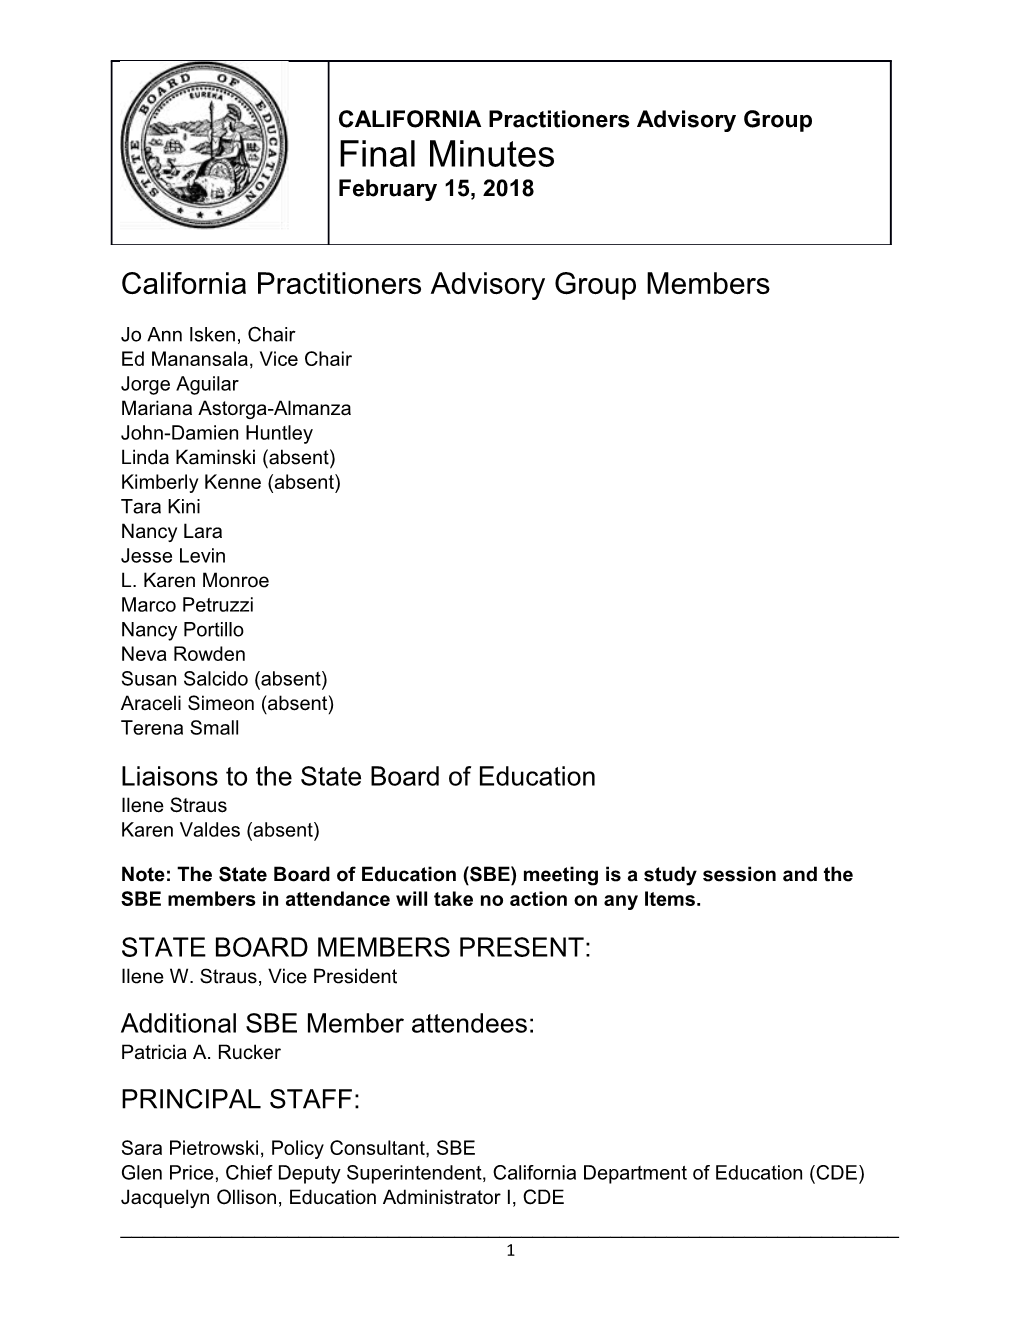 February 15, 2018 Meeting Minutes - CPAG (SBE)